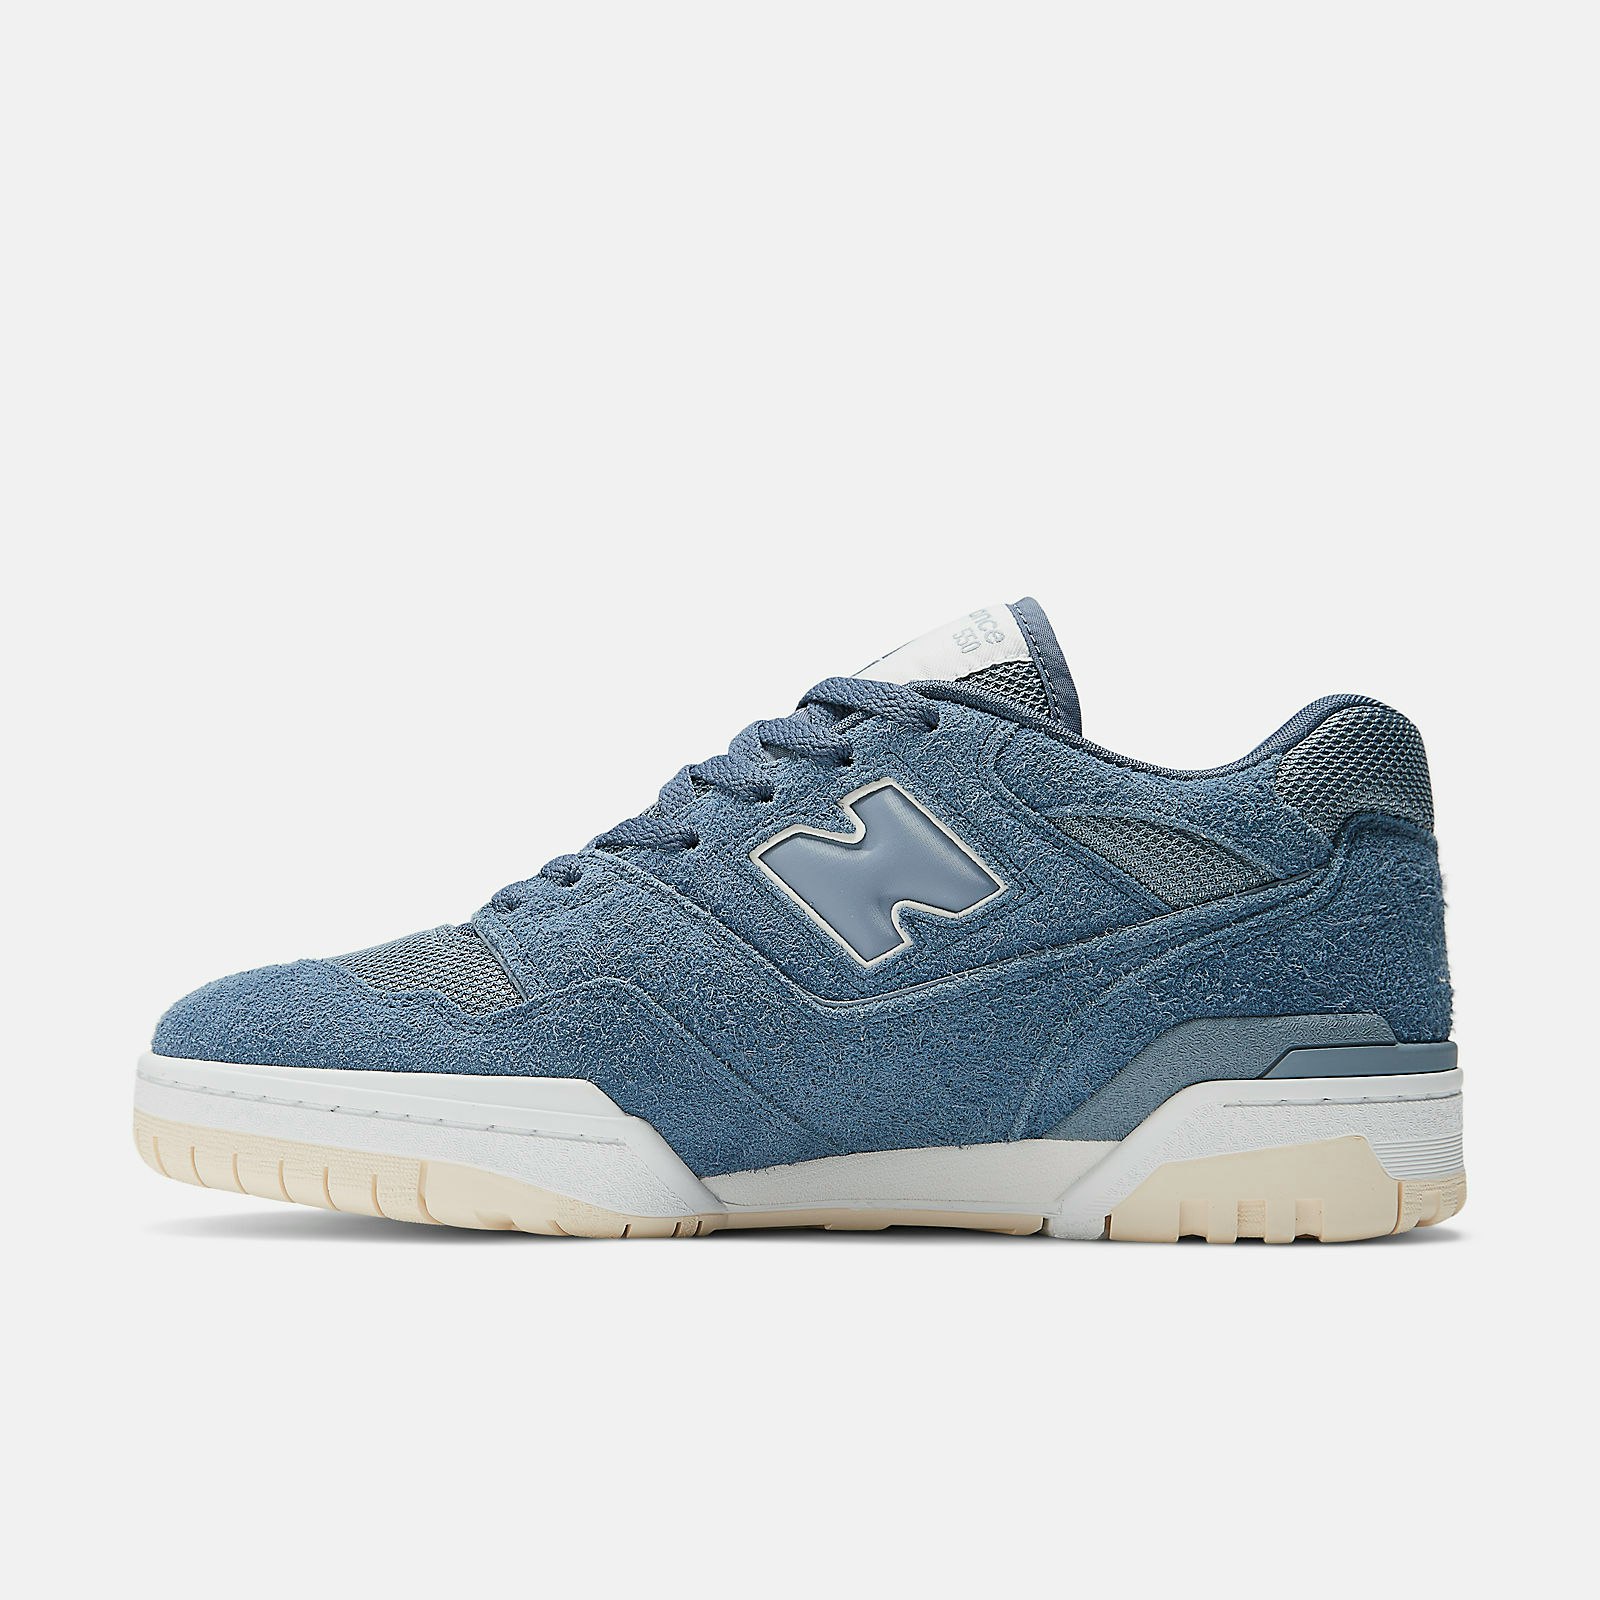 New Balance 550 "Suede Pack" (Arctic Grey)